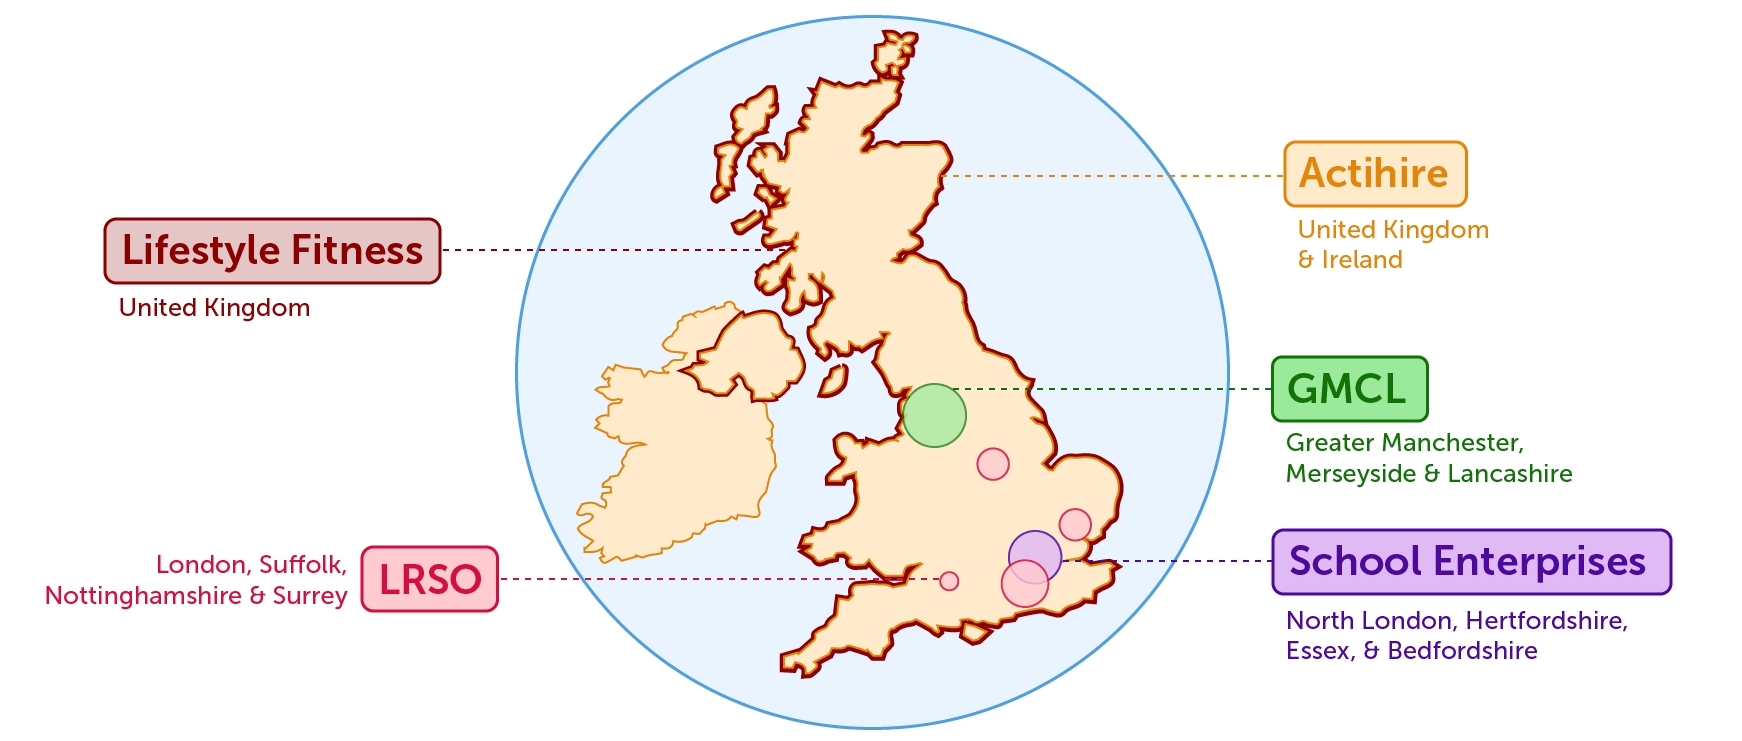 Locations of our school letting partners in the UK and Ireland